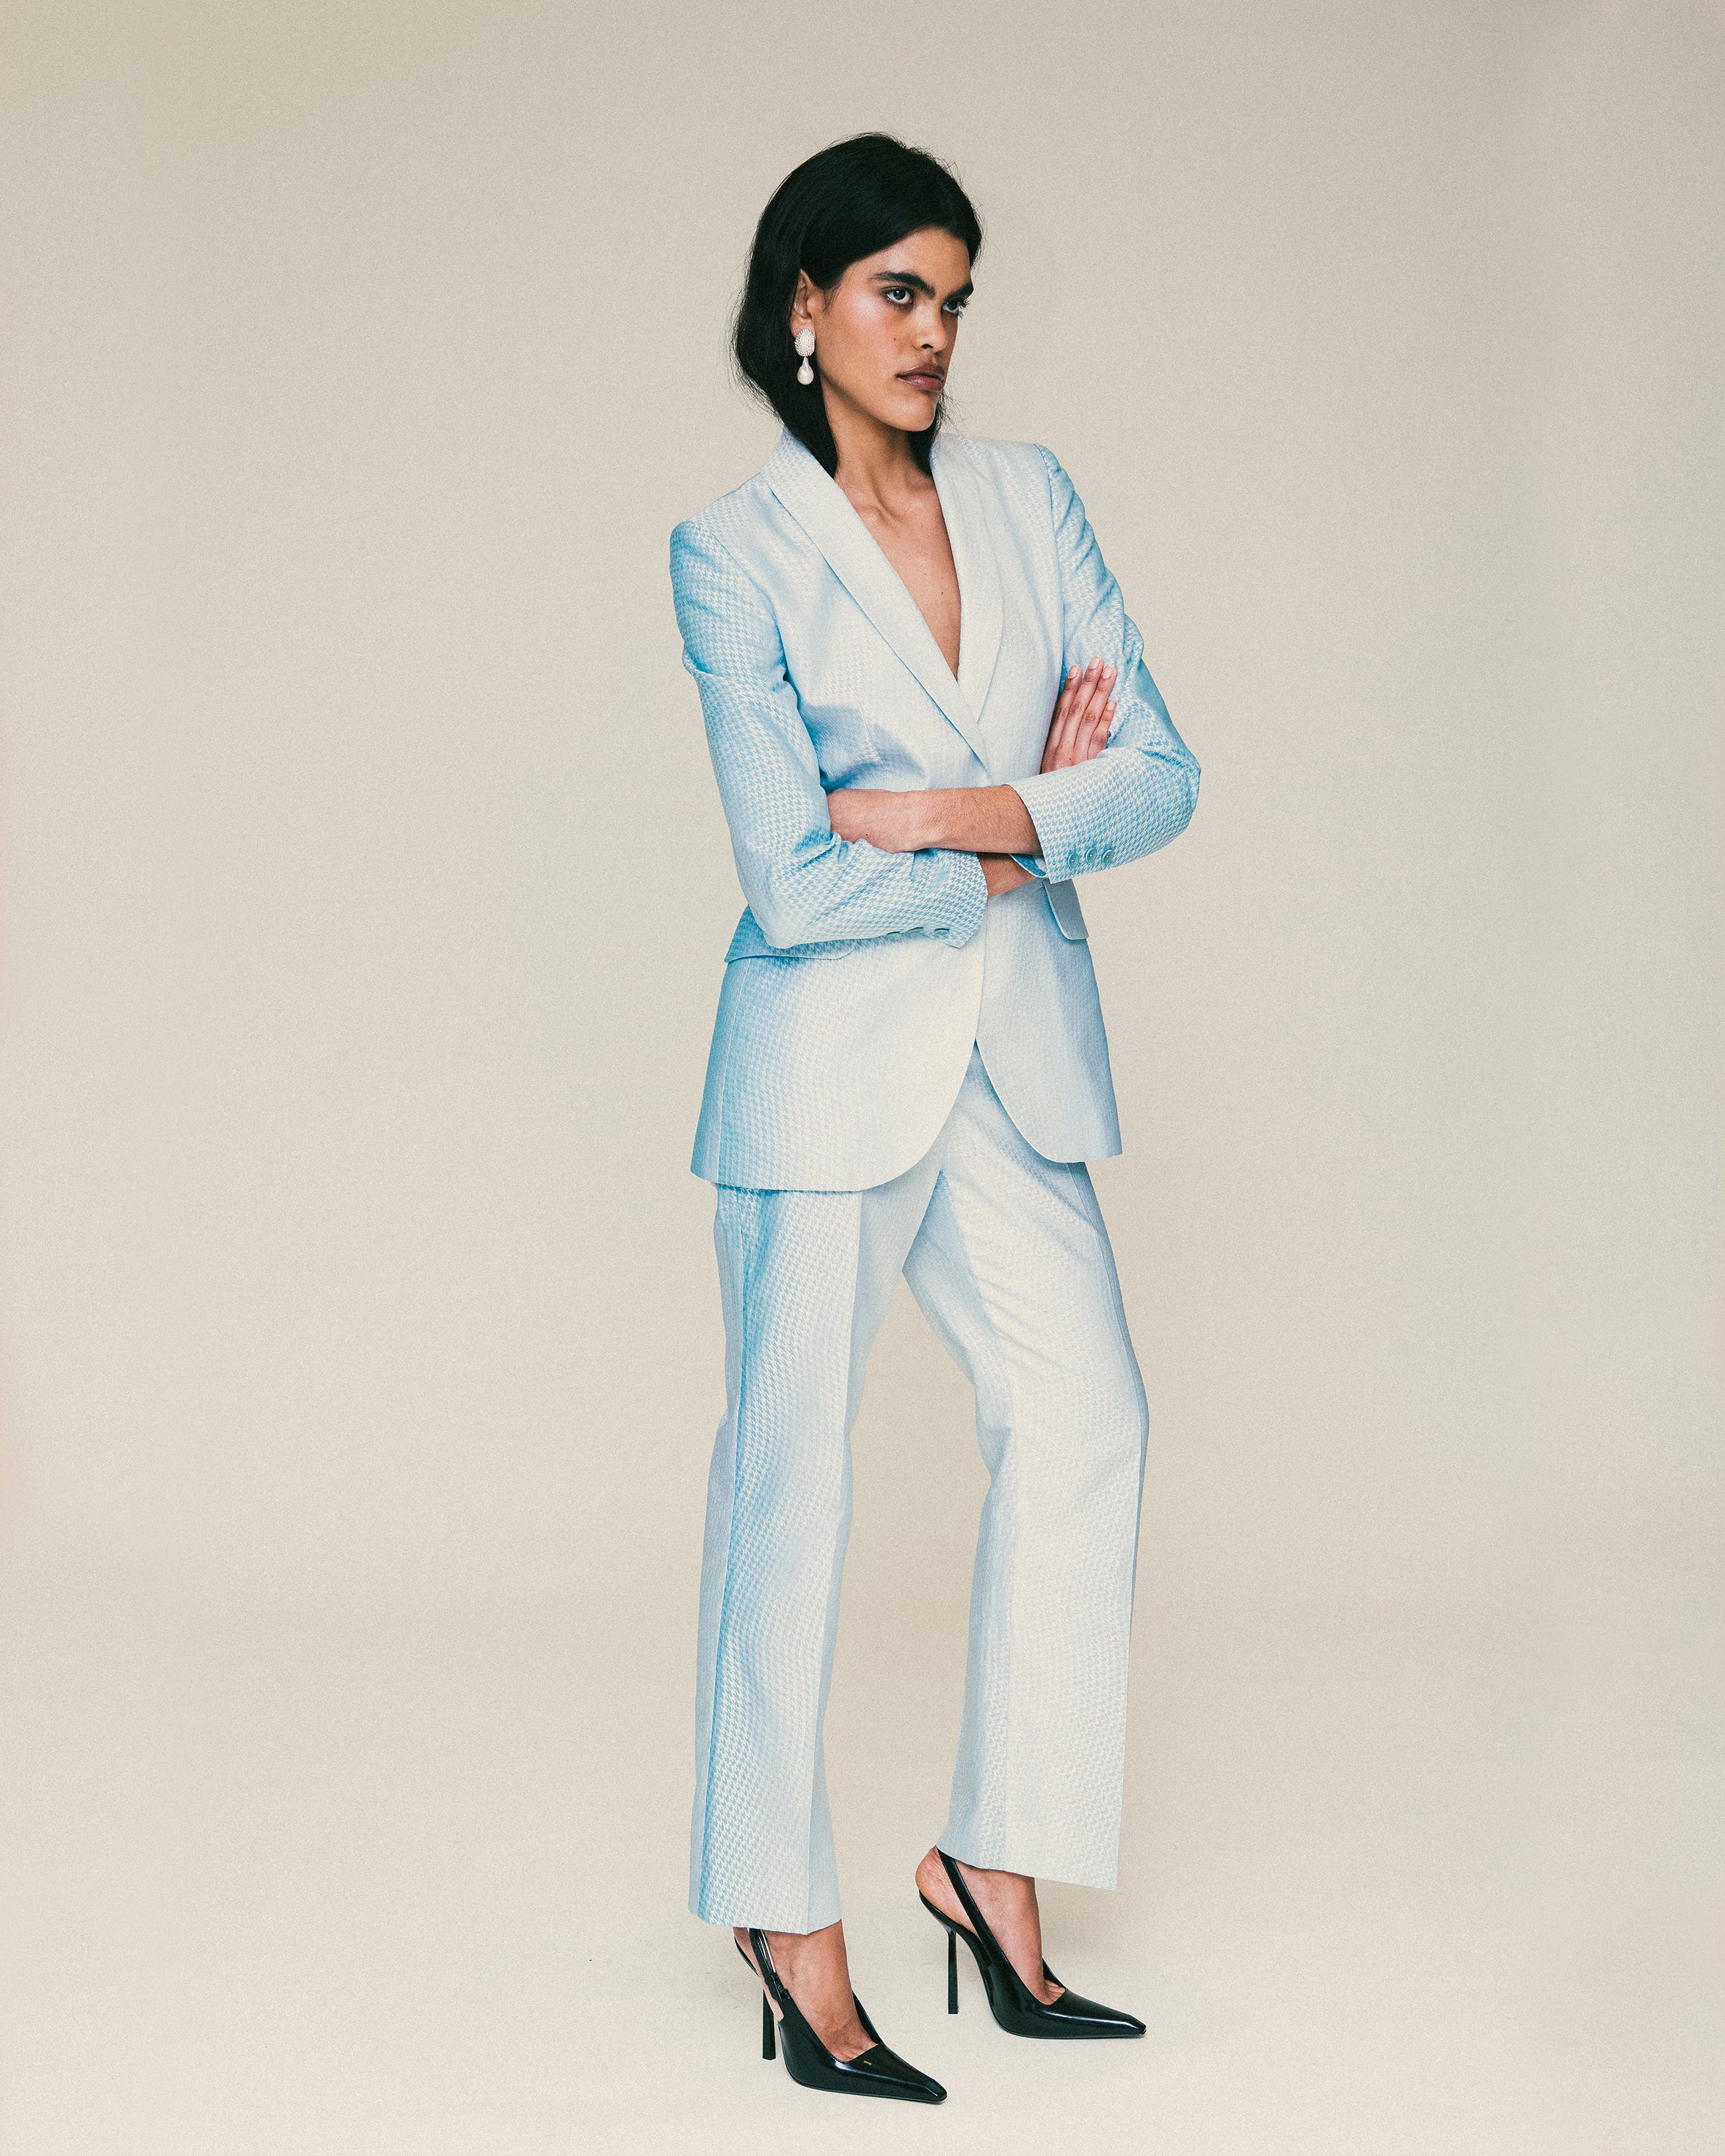 S/S 1999 Blue and White Houndstooth Gradient Pantsuit